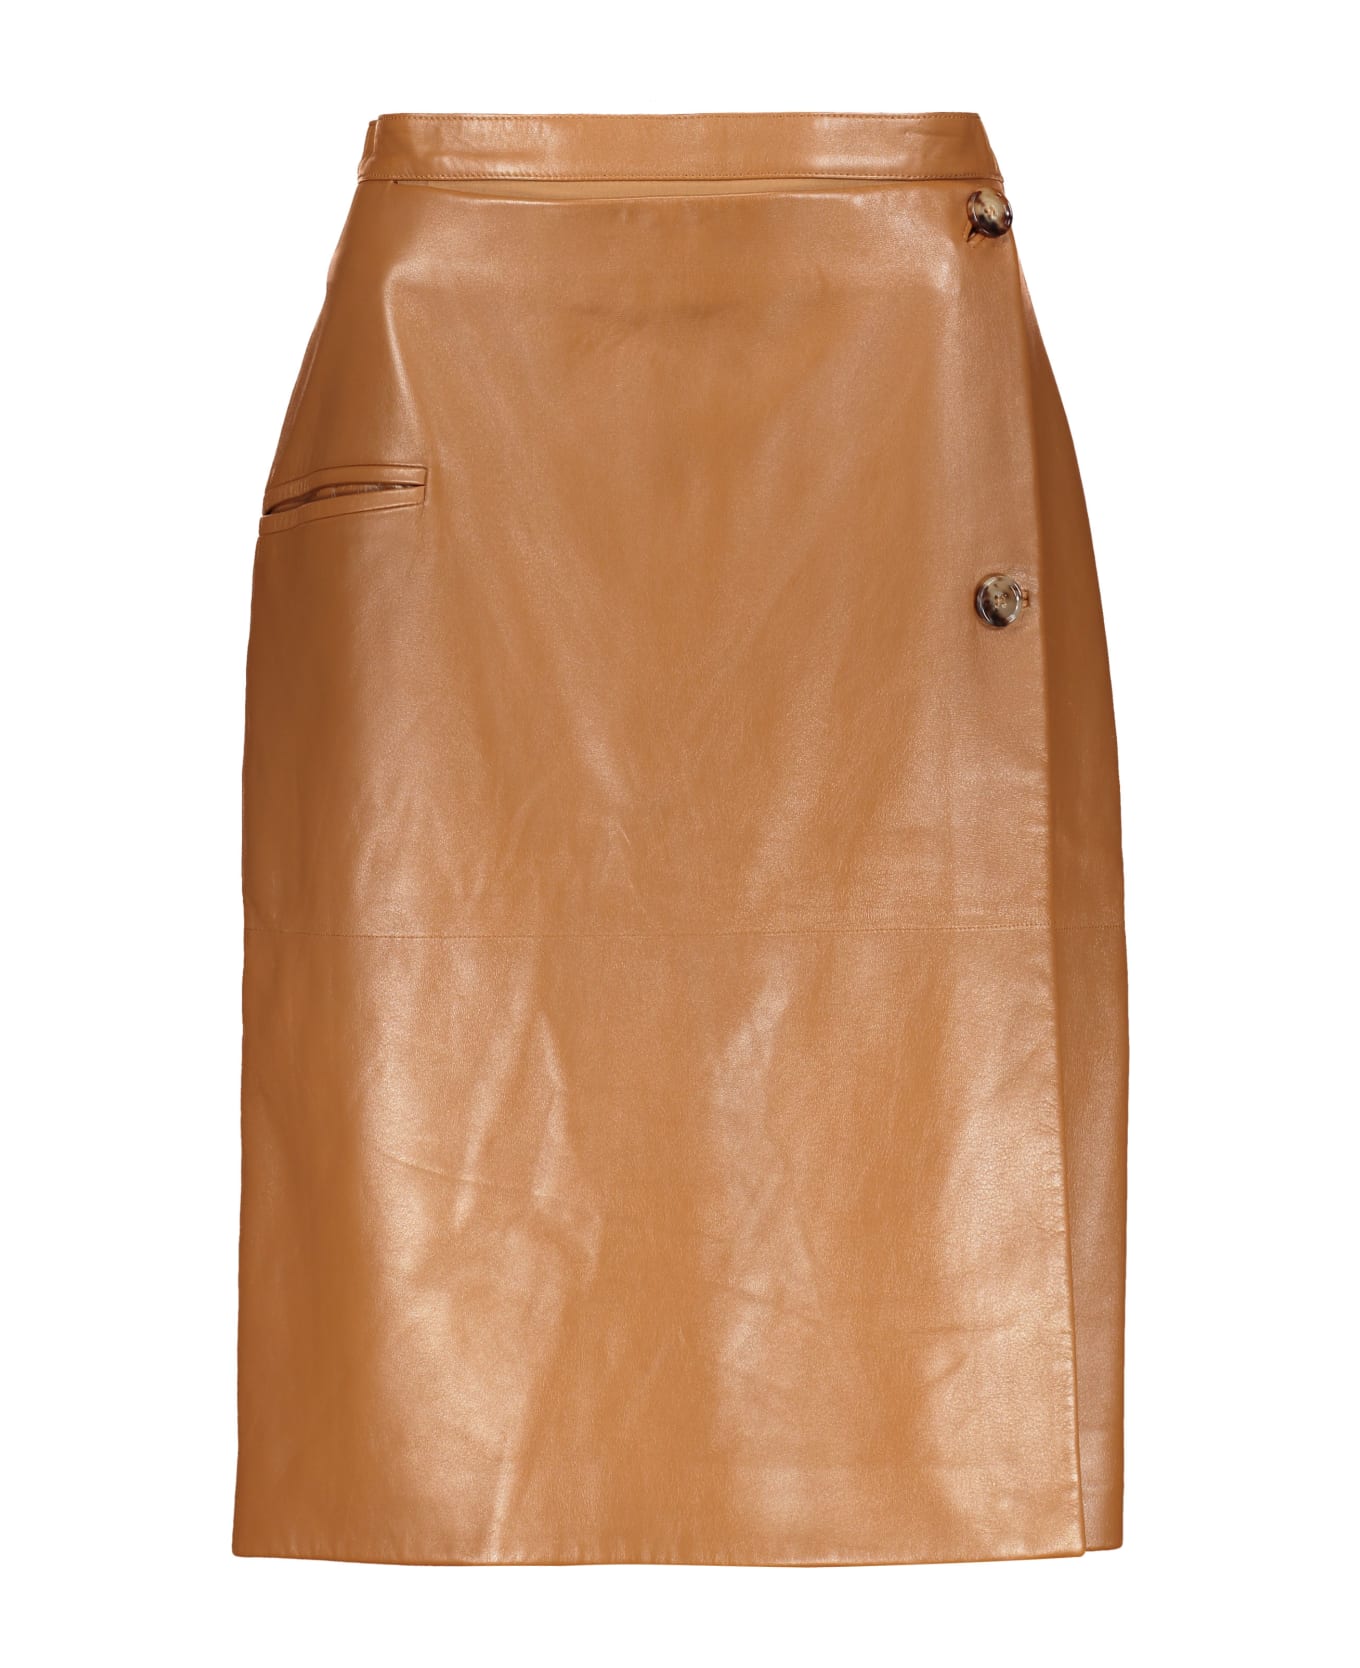 Burberry Leather Skirt - brown